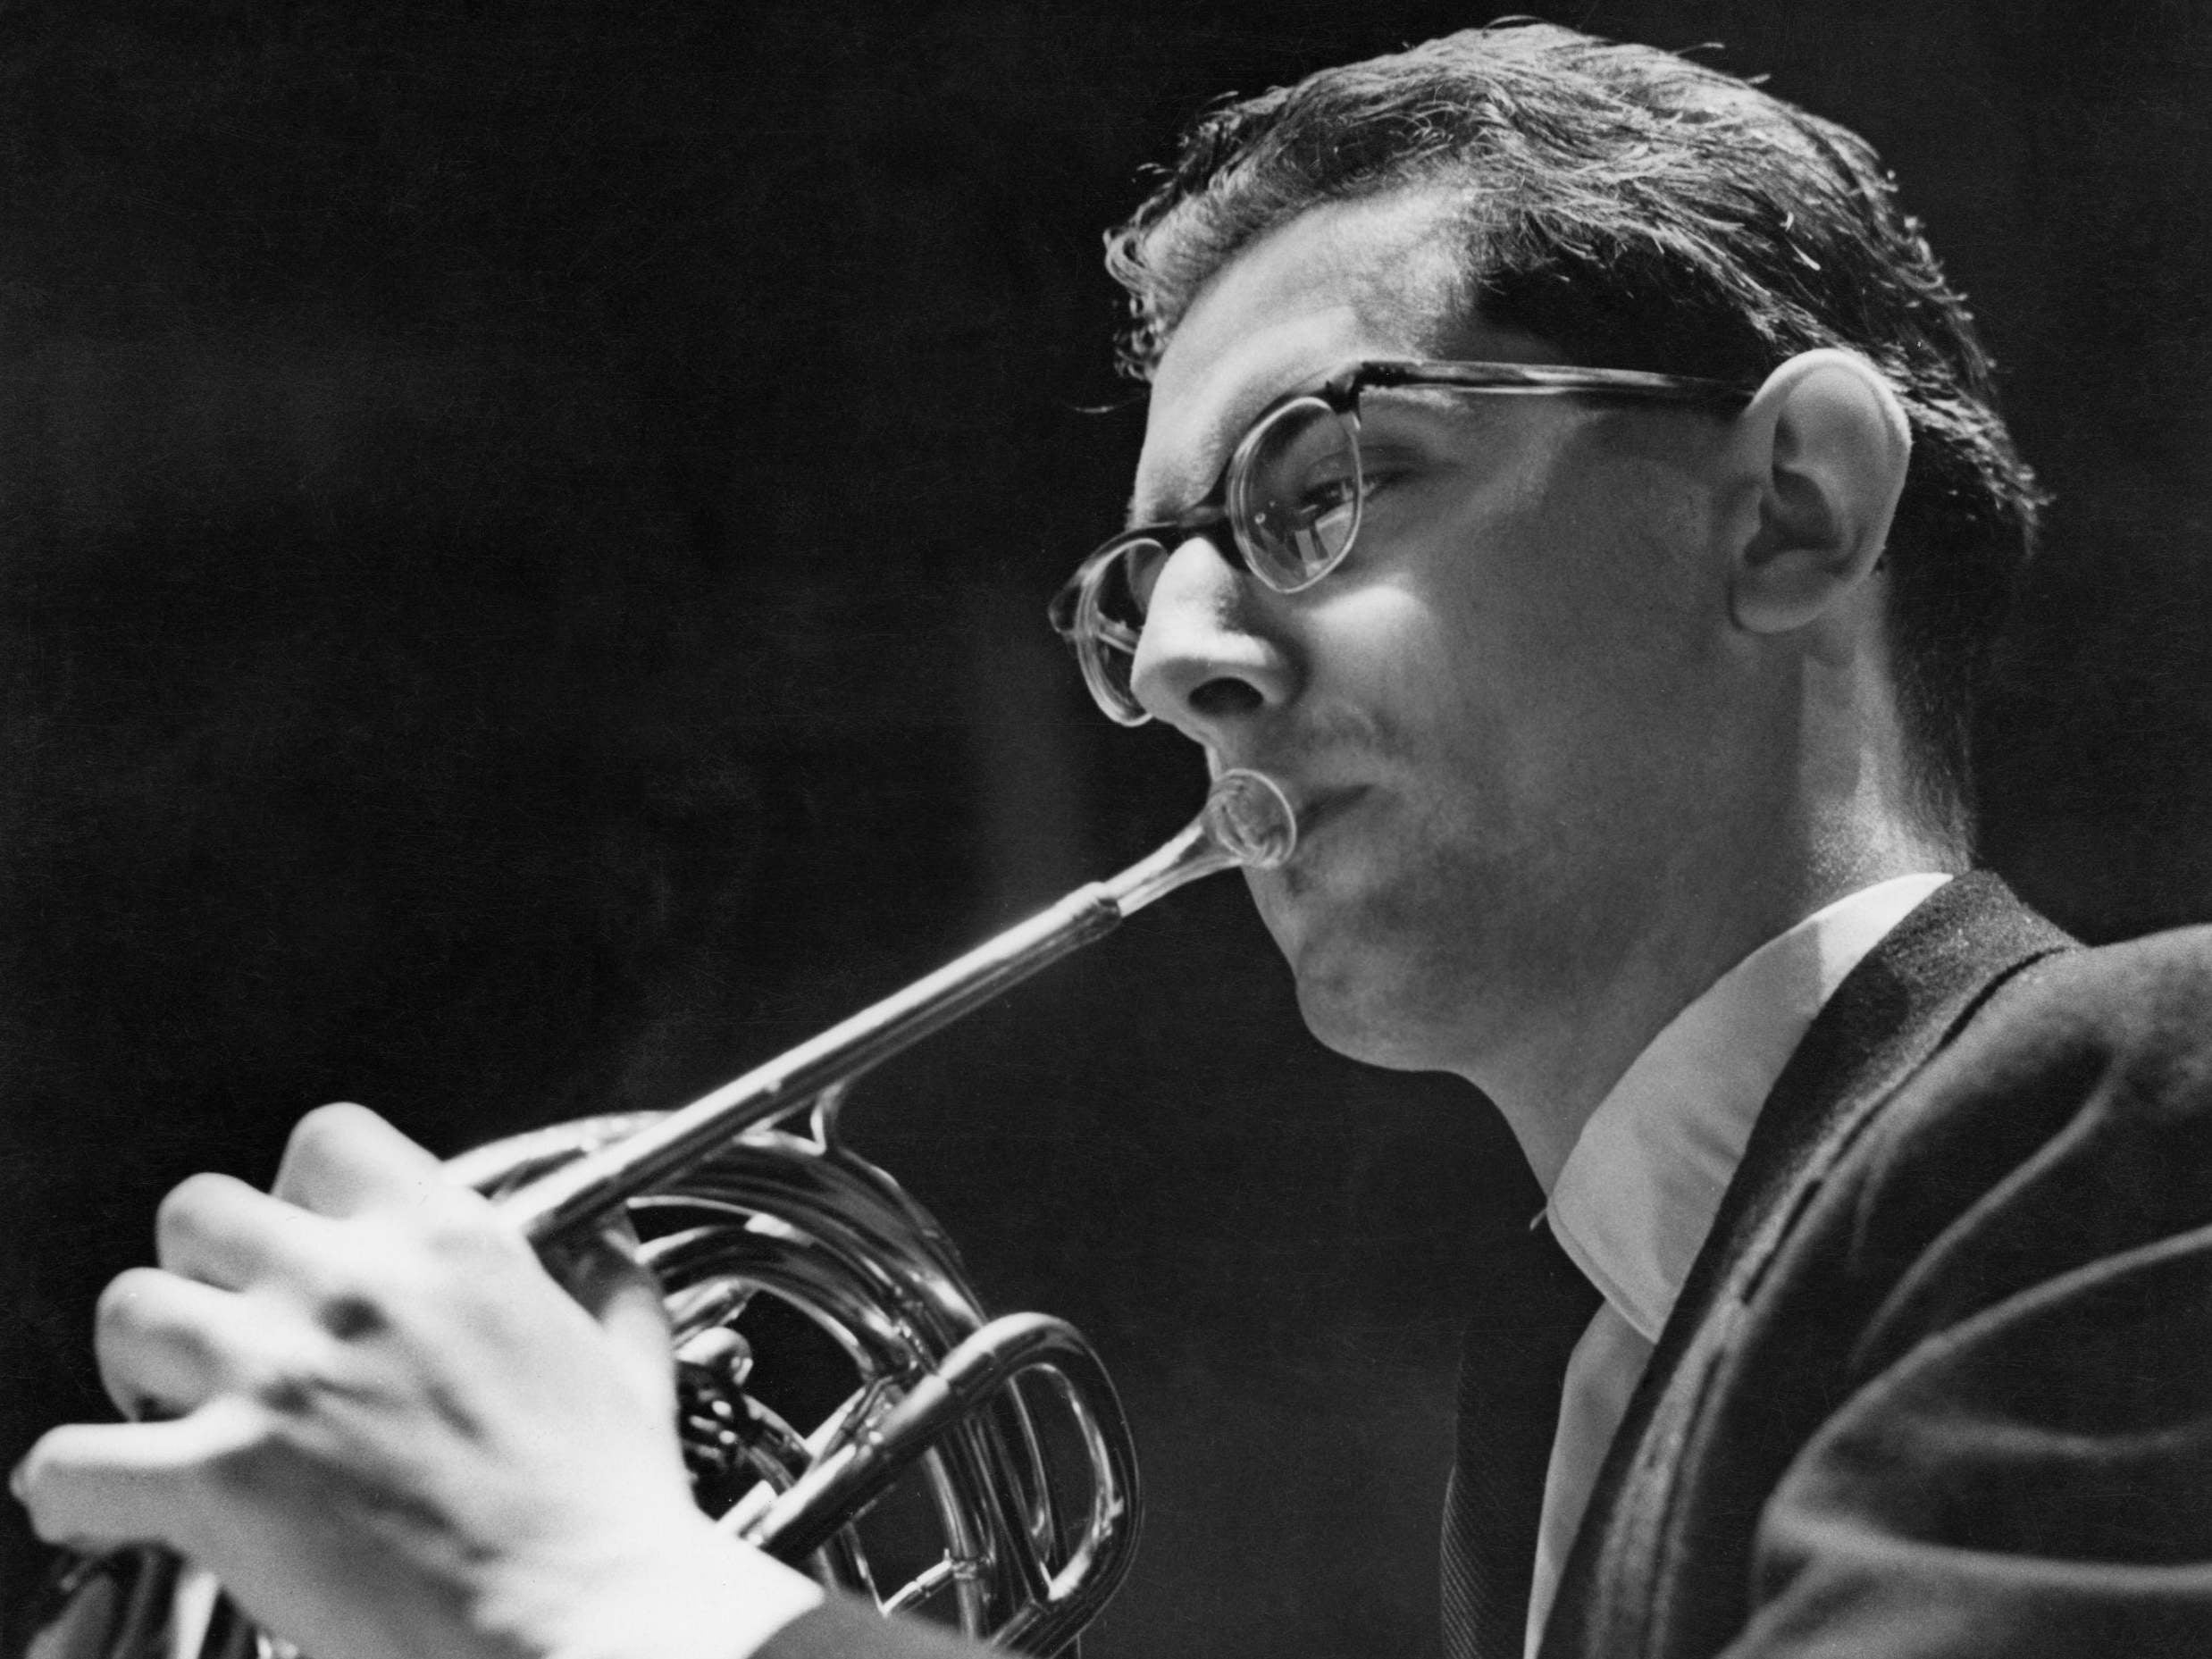 Barry Tuckwell: Pre-eminent horn player who became a star of orchestral music